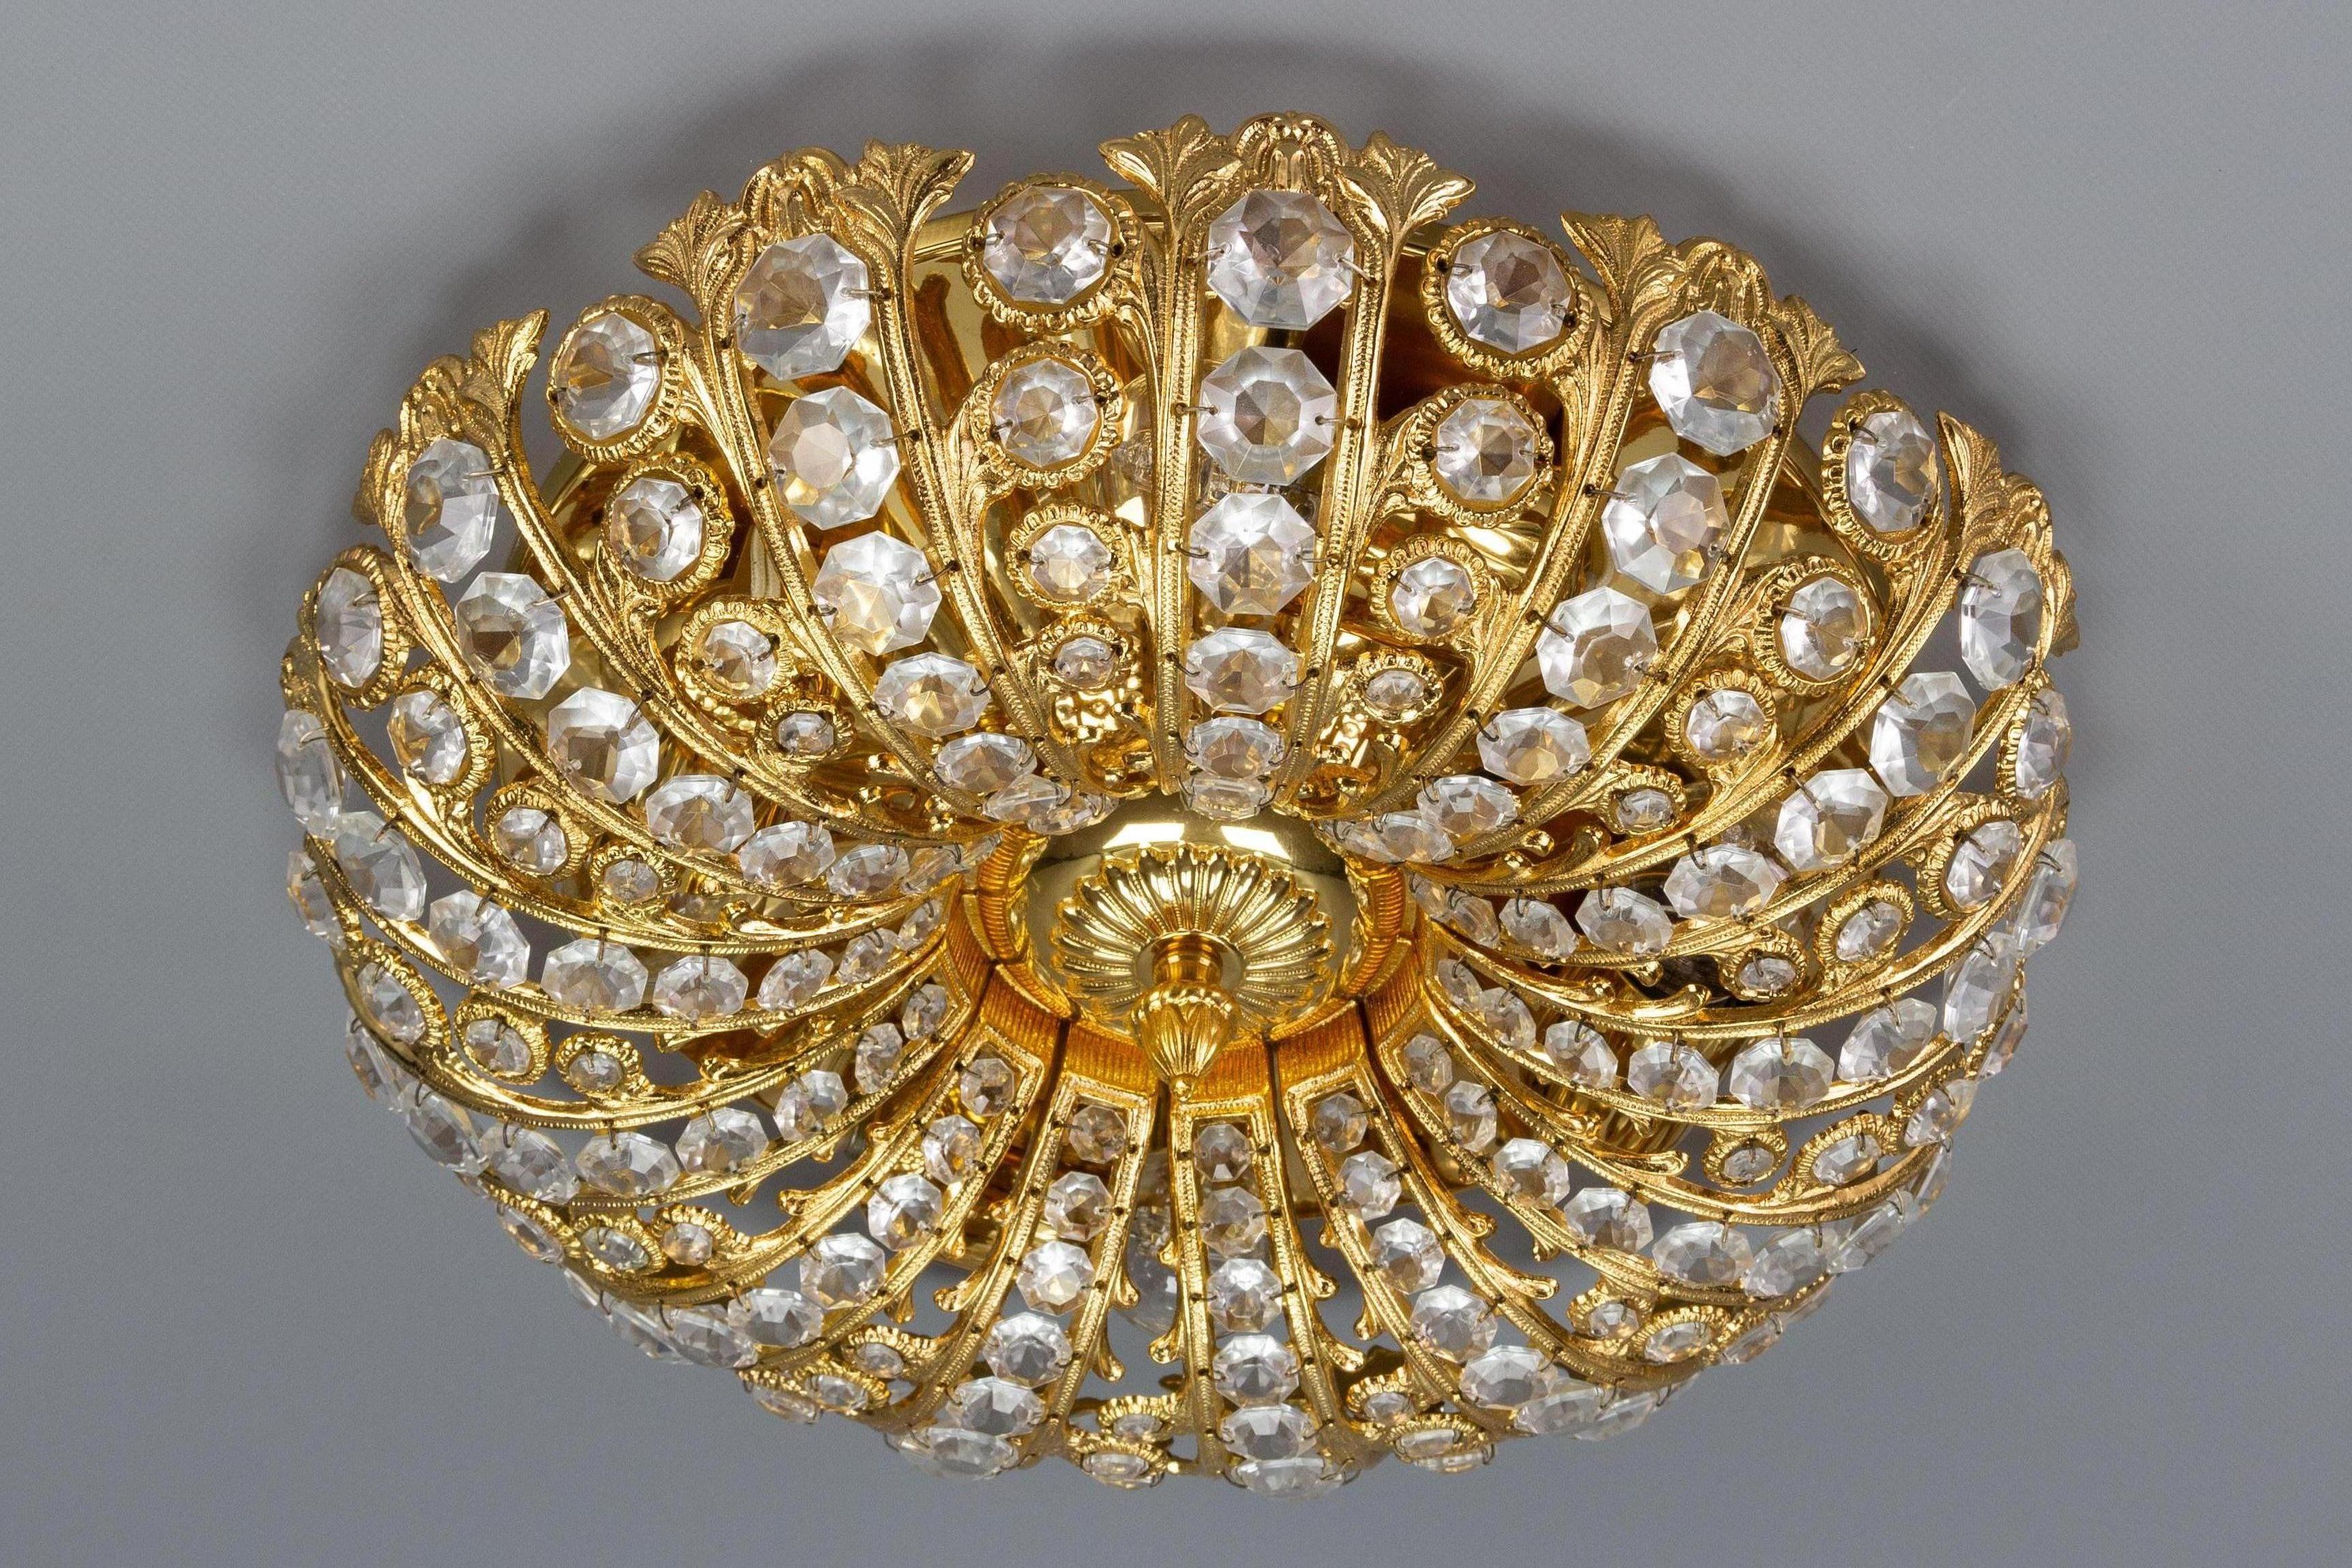 An impressive flush mount or wall lamp by Peris Andreu for S. A. Riper Valencia, Spain, circa the 1970s, featuring a gold-toned metal frame with a Baroque style scroll motif and faceted gem-cut glass prisms, beautifully arranged from smaller to